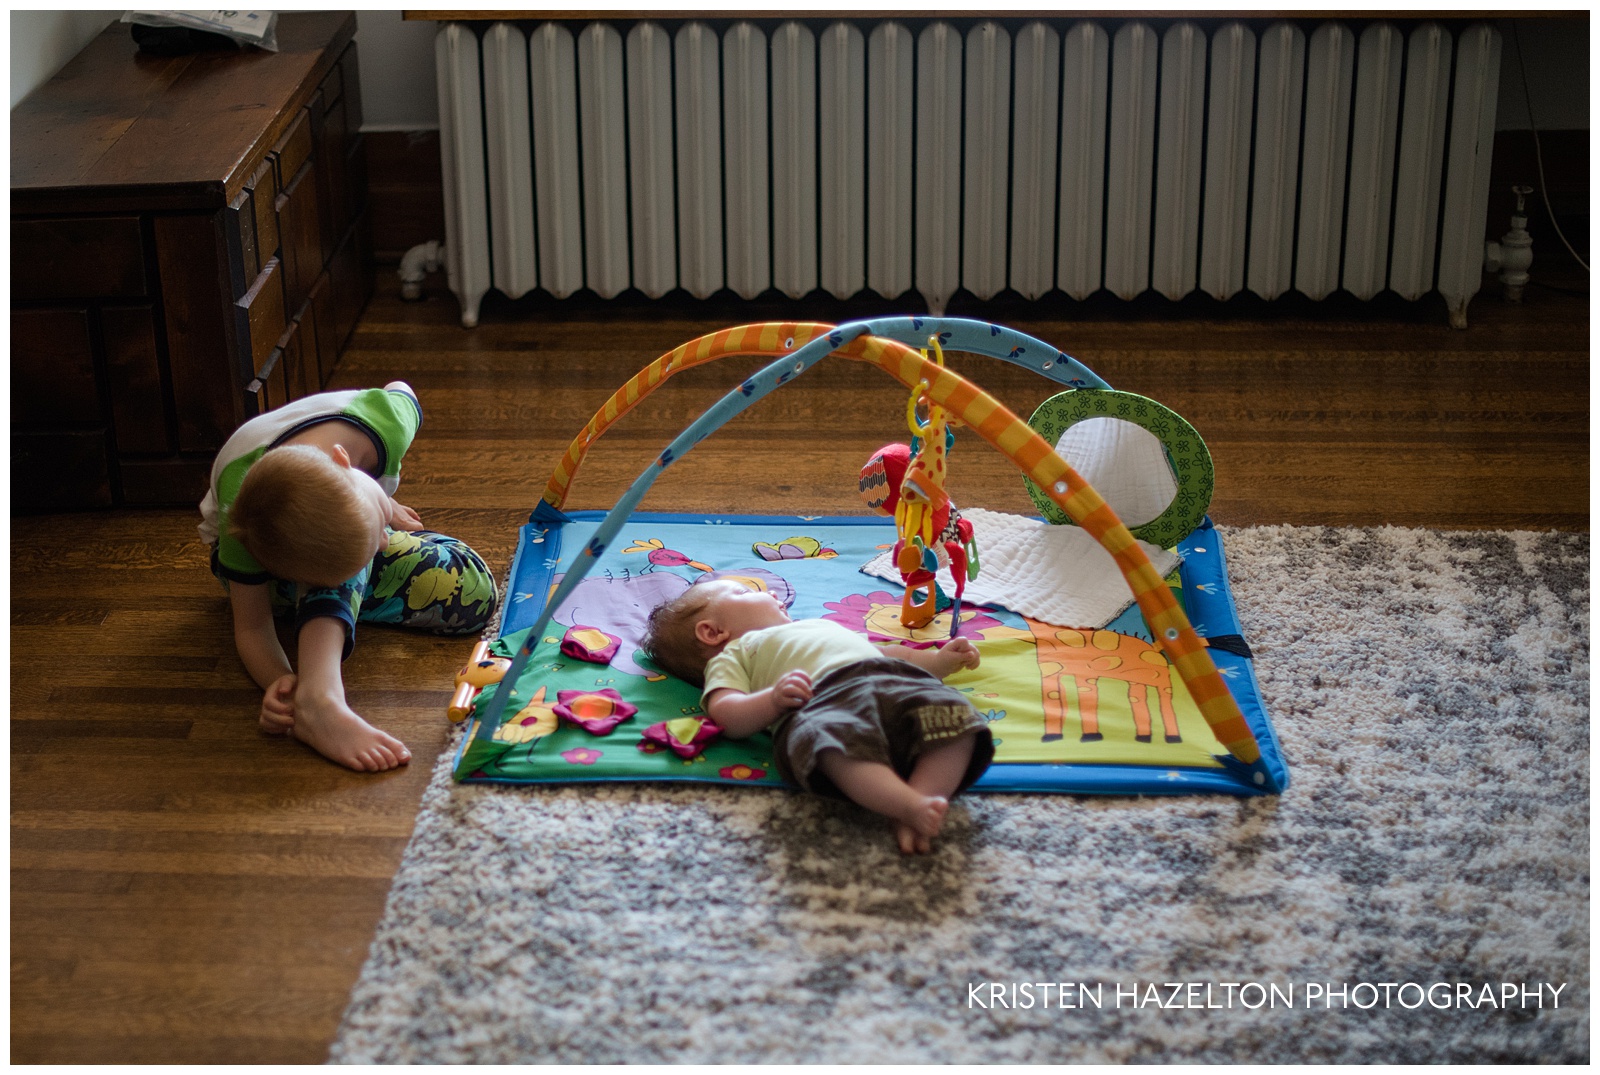 Big brother playing with baby sister on a playmat